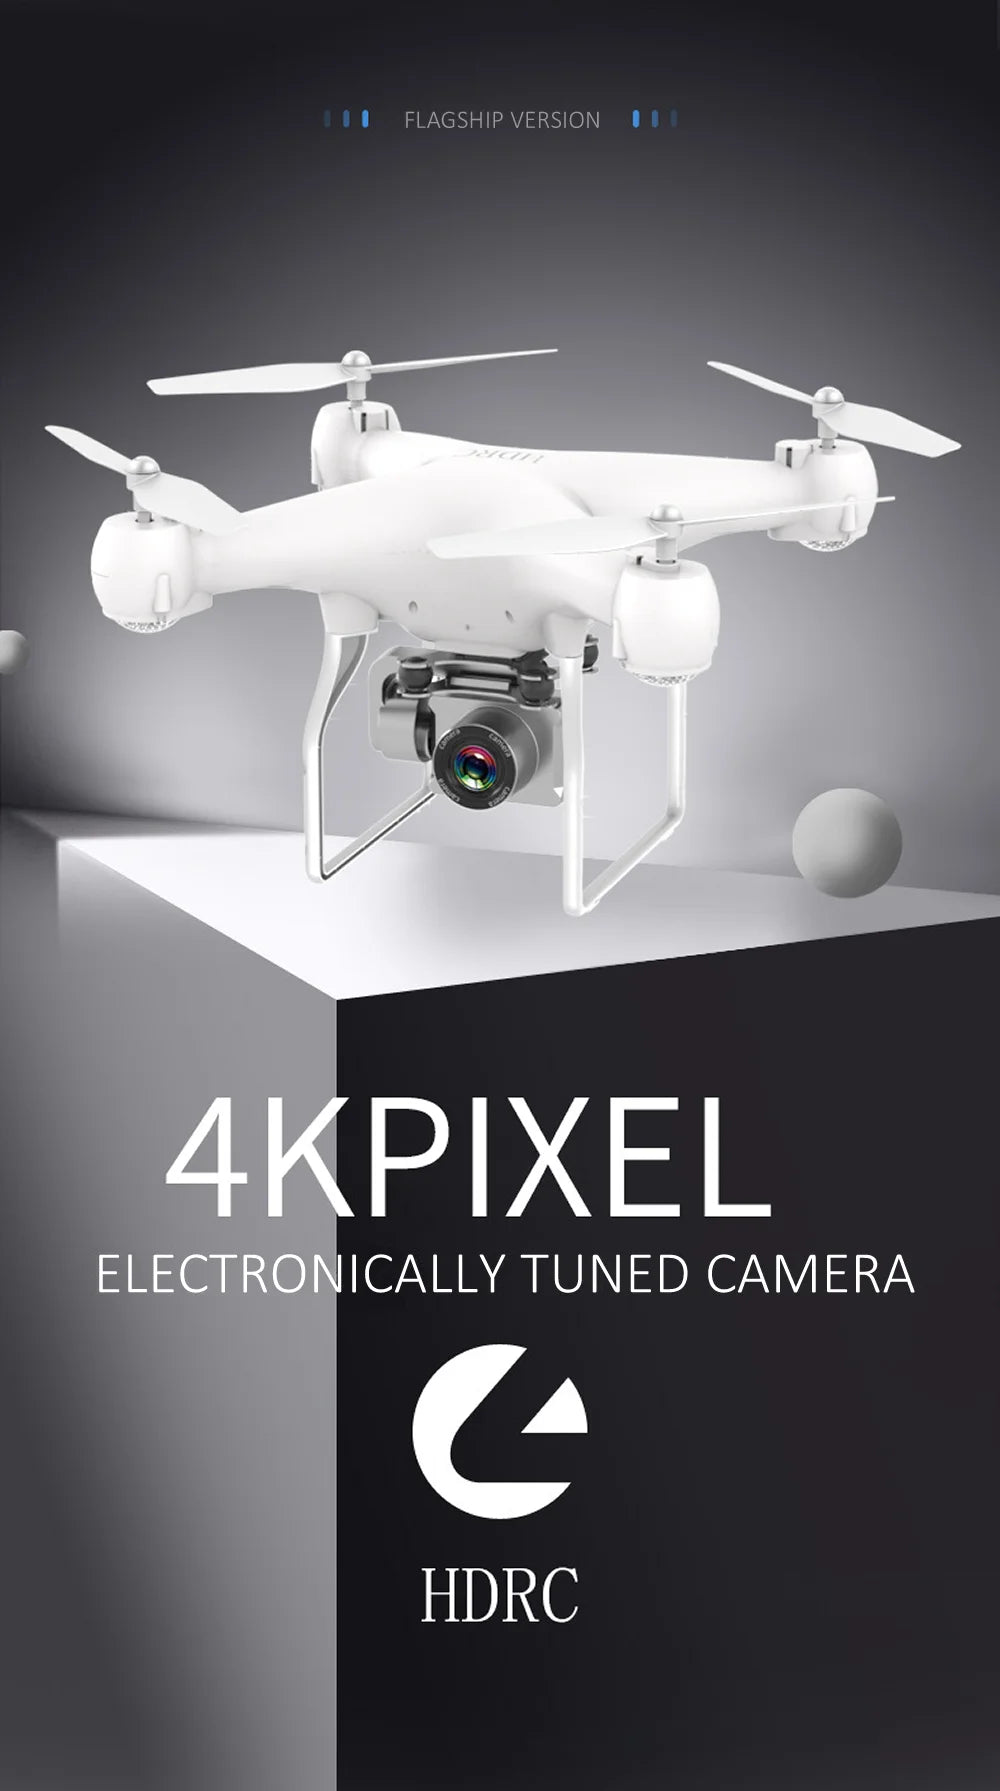 RC Drone, flagship version 4kpixel electronically tuned camera hdr